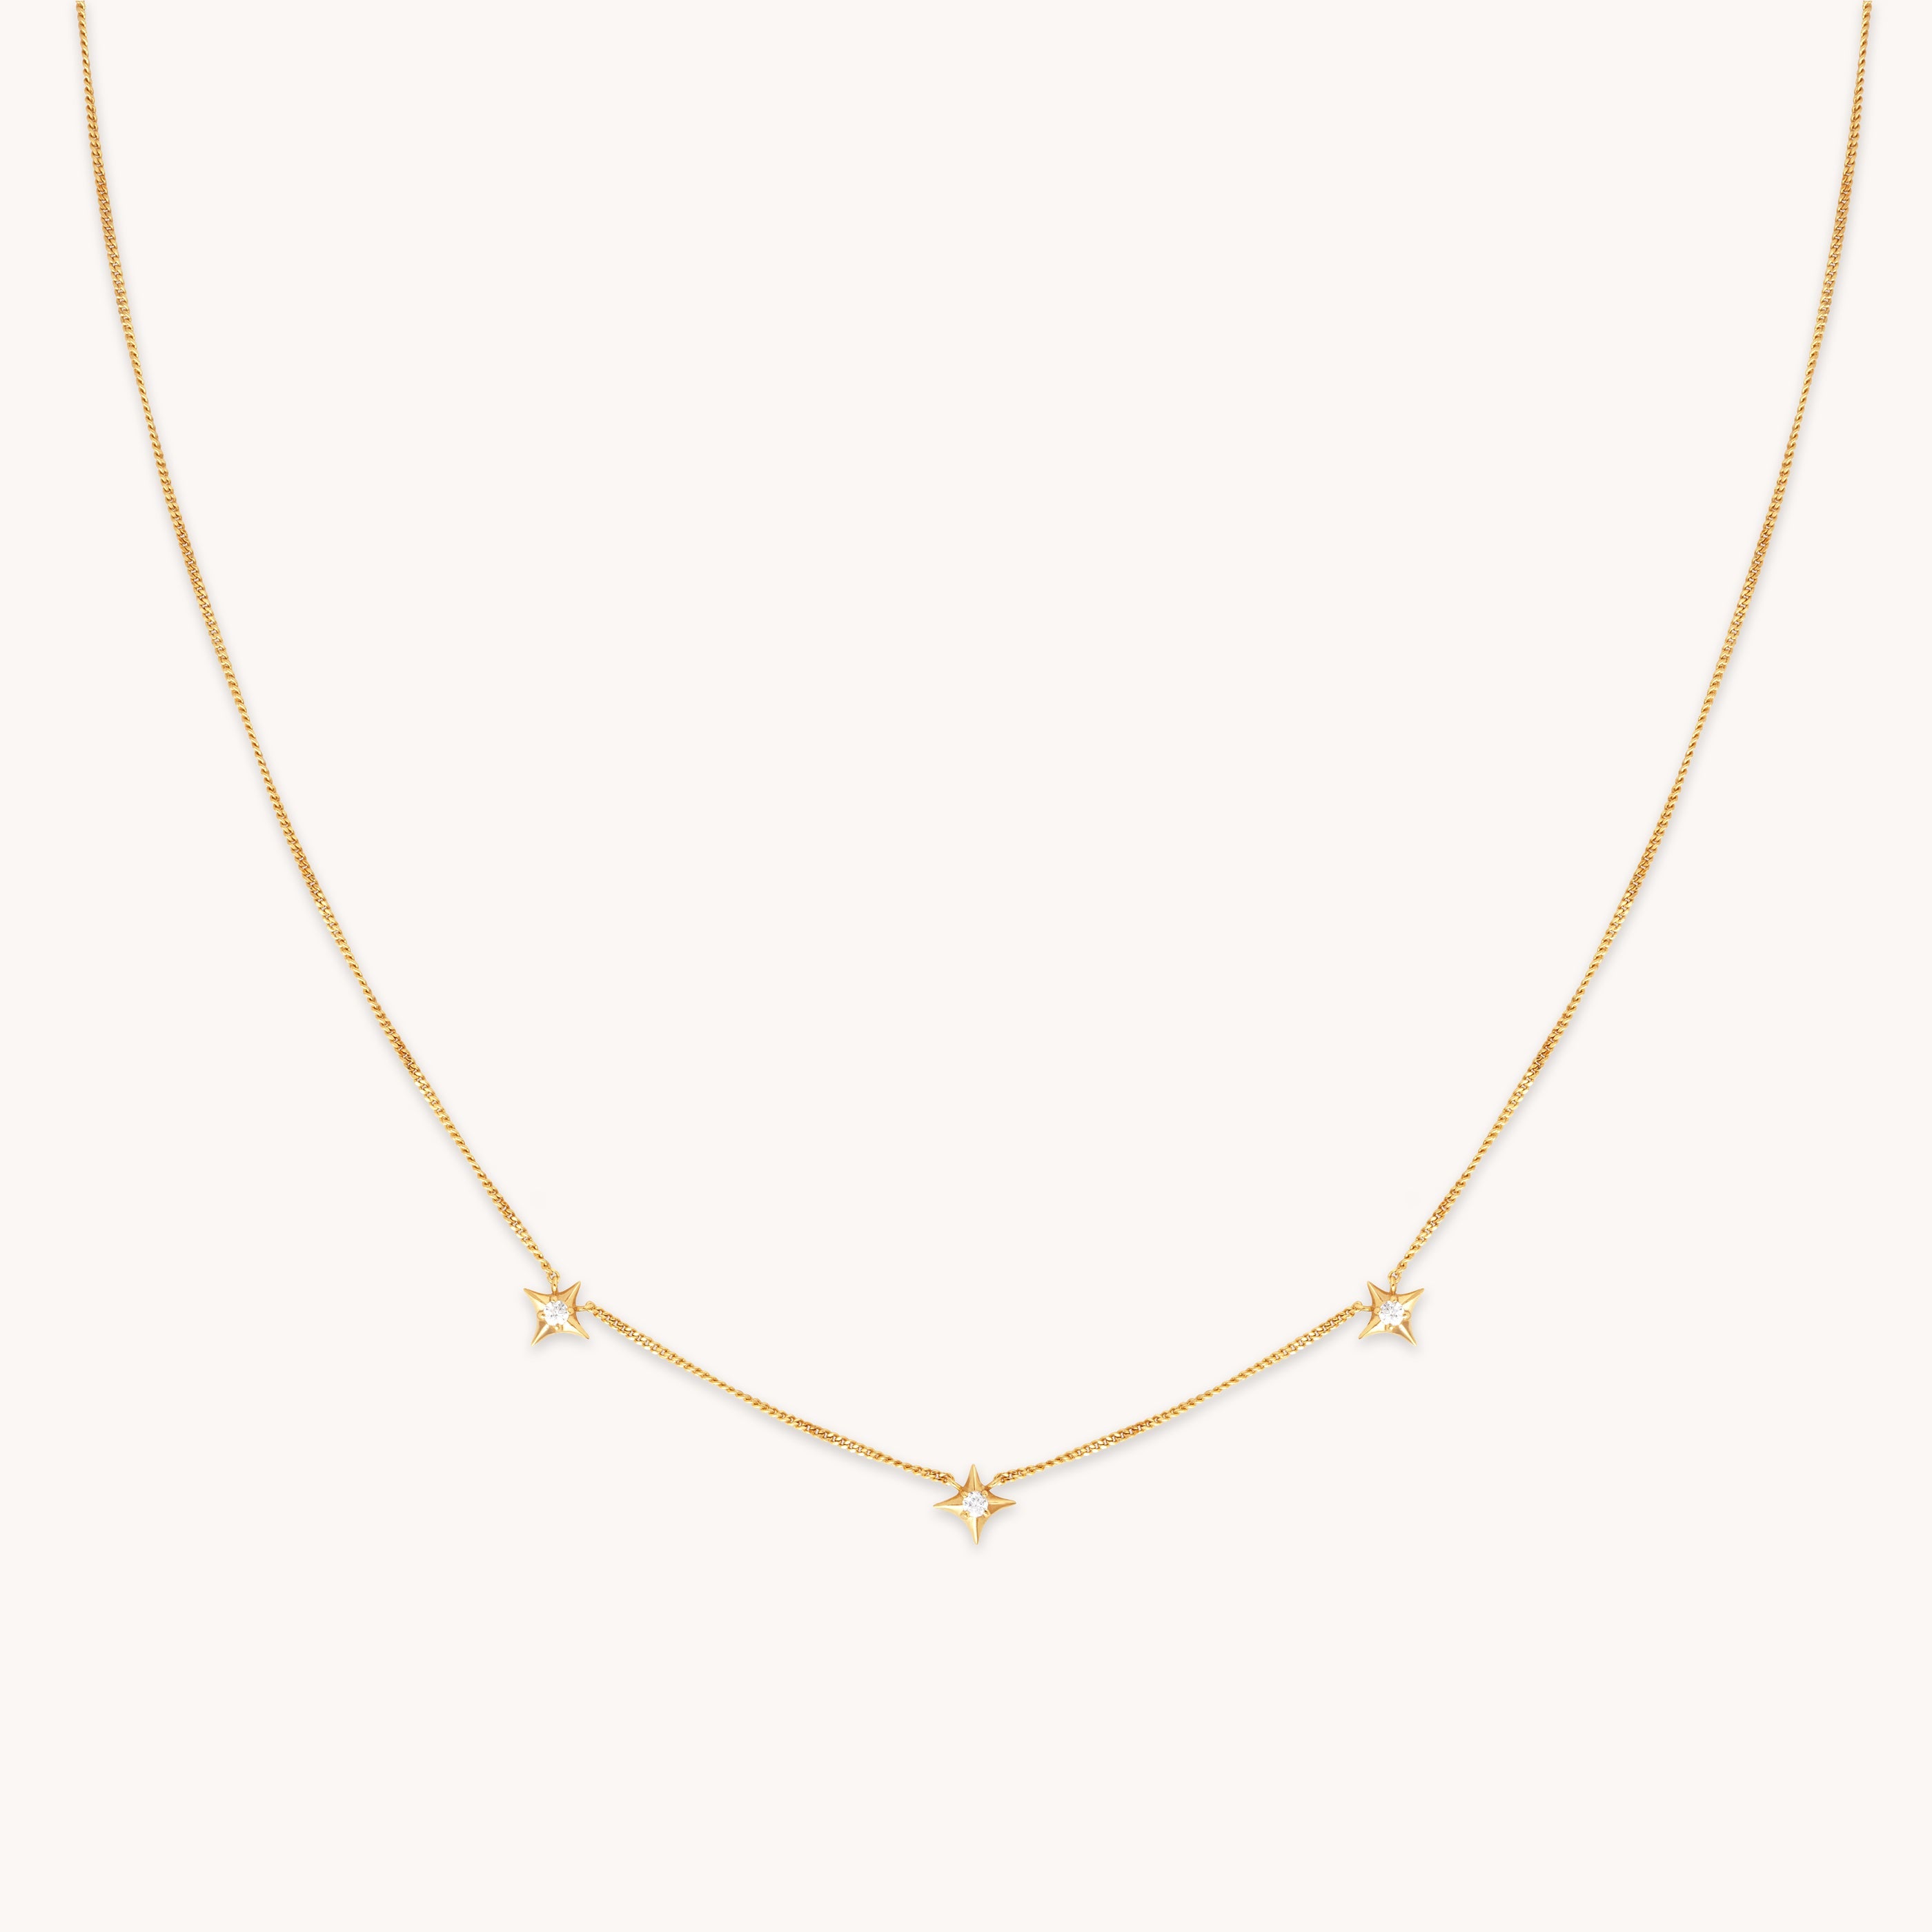 Cosmic Star Charm Gold Necklace | Astrid & Miyu Necklaces